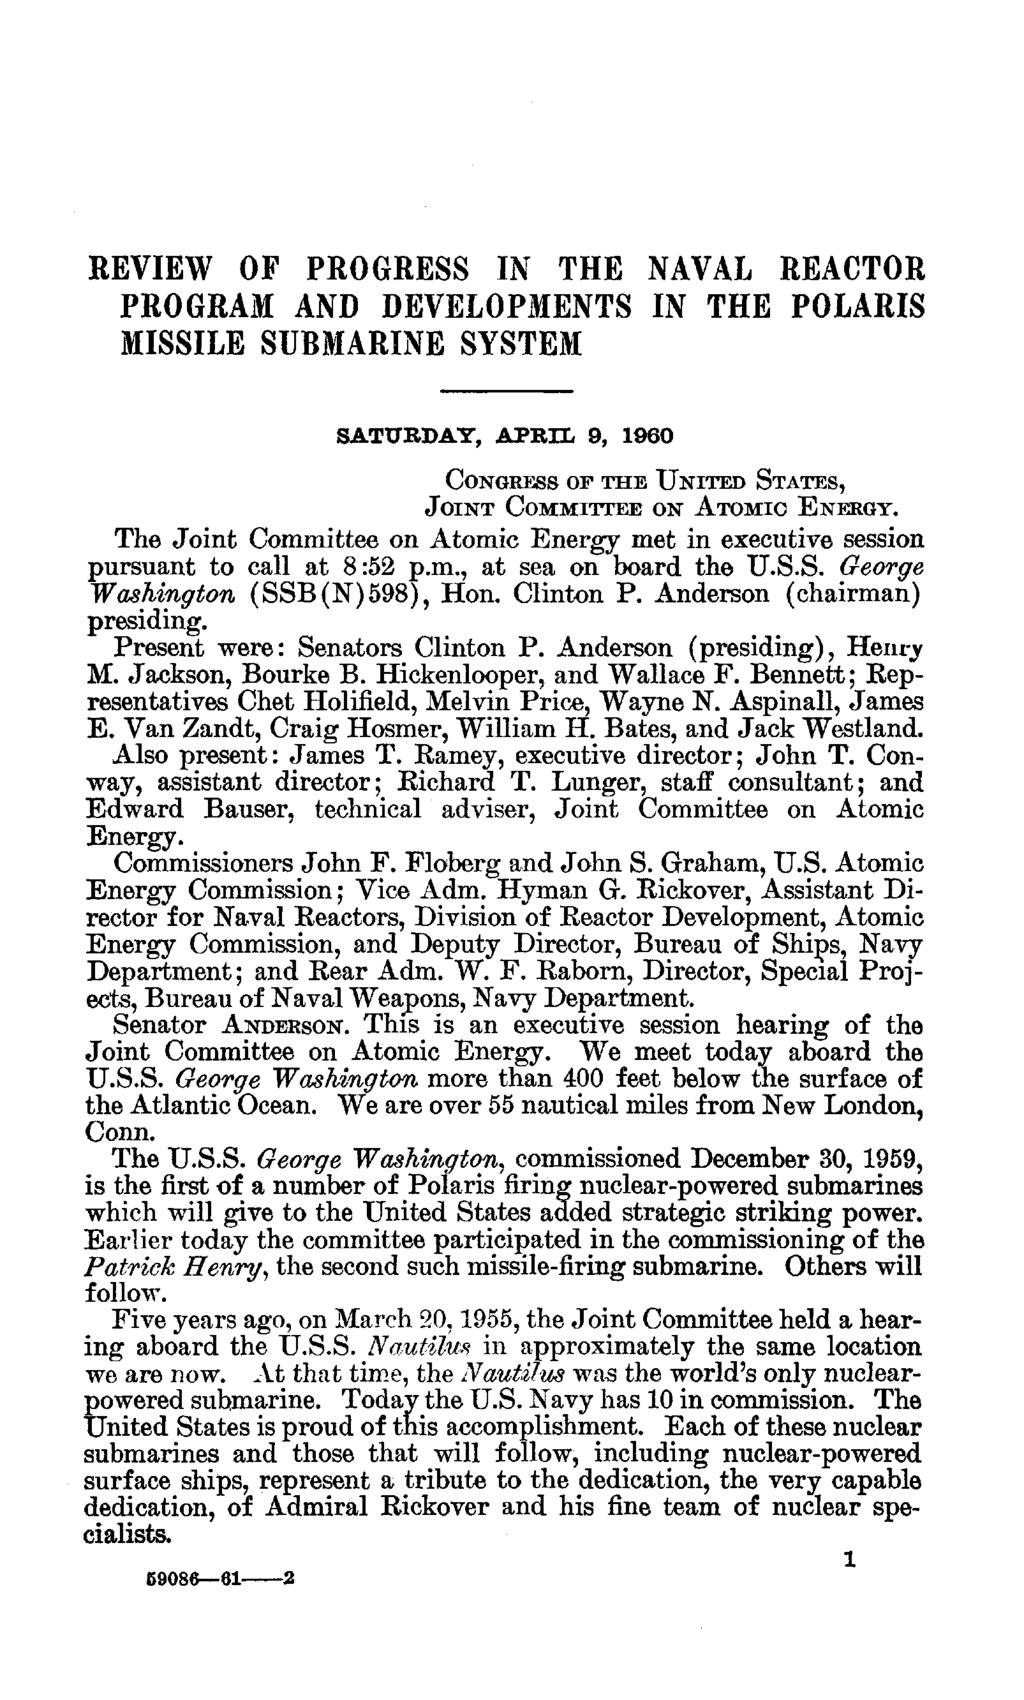 REVIEW OF PROGRESS IN THE NAVAL REACTOR PROGRAM AND DEVELOPMENTS IN THE POLARIS MISSILE SUBMARINE SYSTEM SATURDAY, APRIL 9, 1960 CONGRESS OF THE UNITED STATES, JOINT COMMITTEE ON ATOMIC ENERGY.